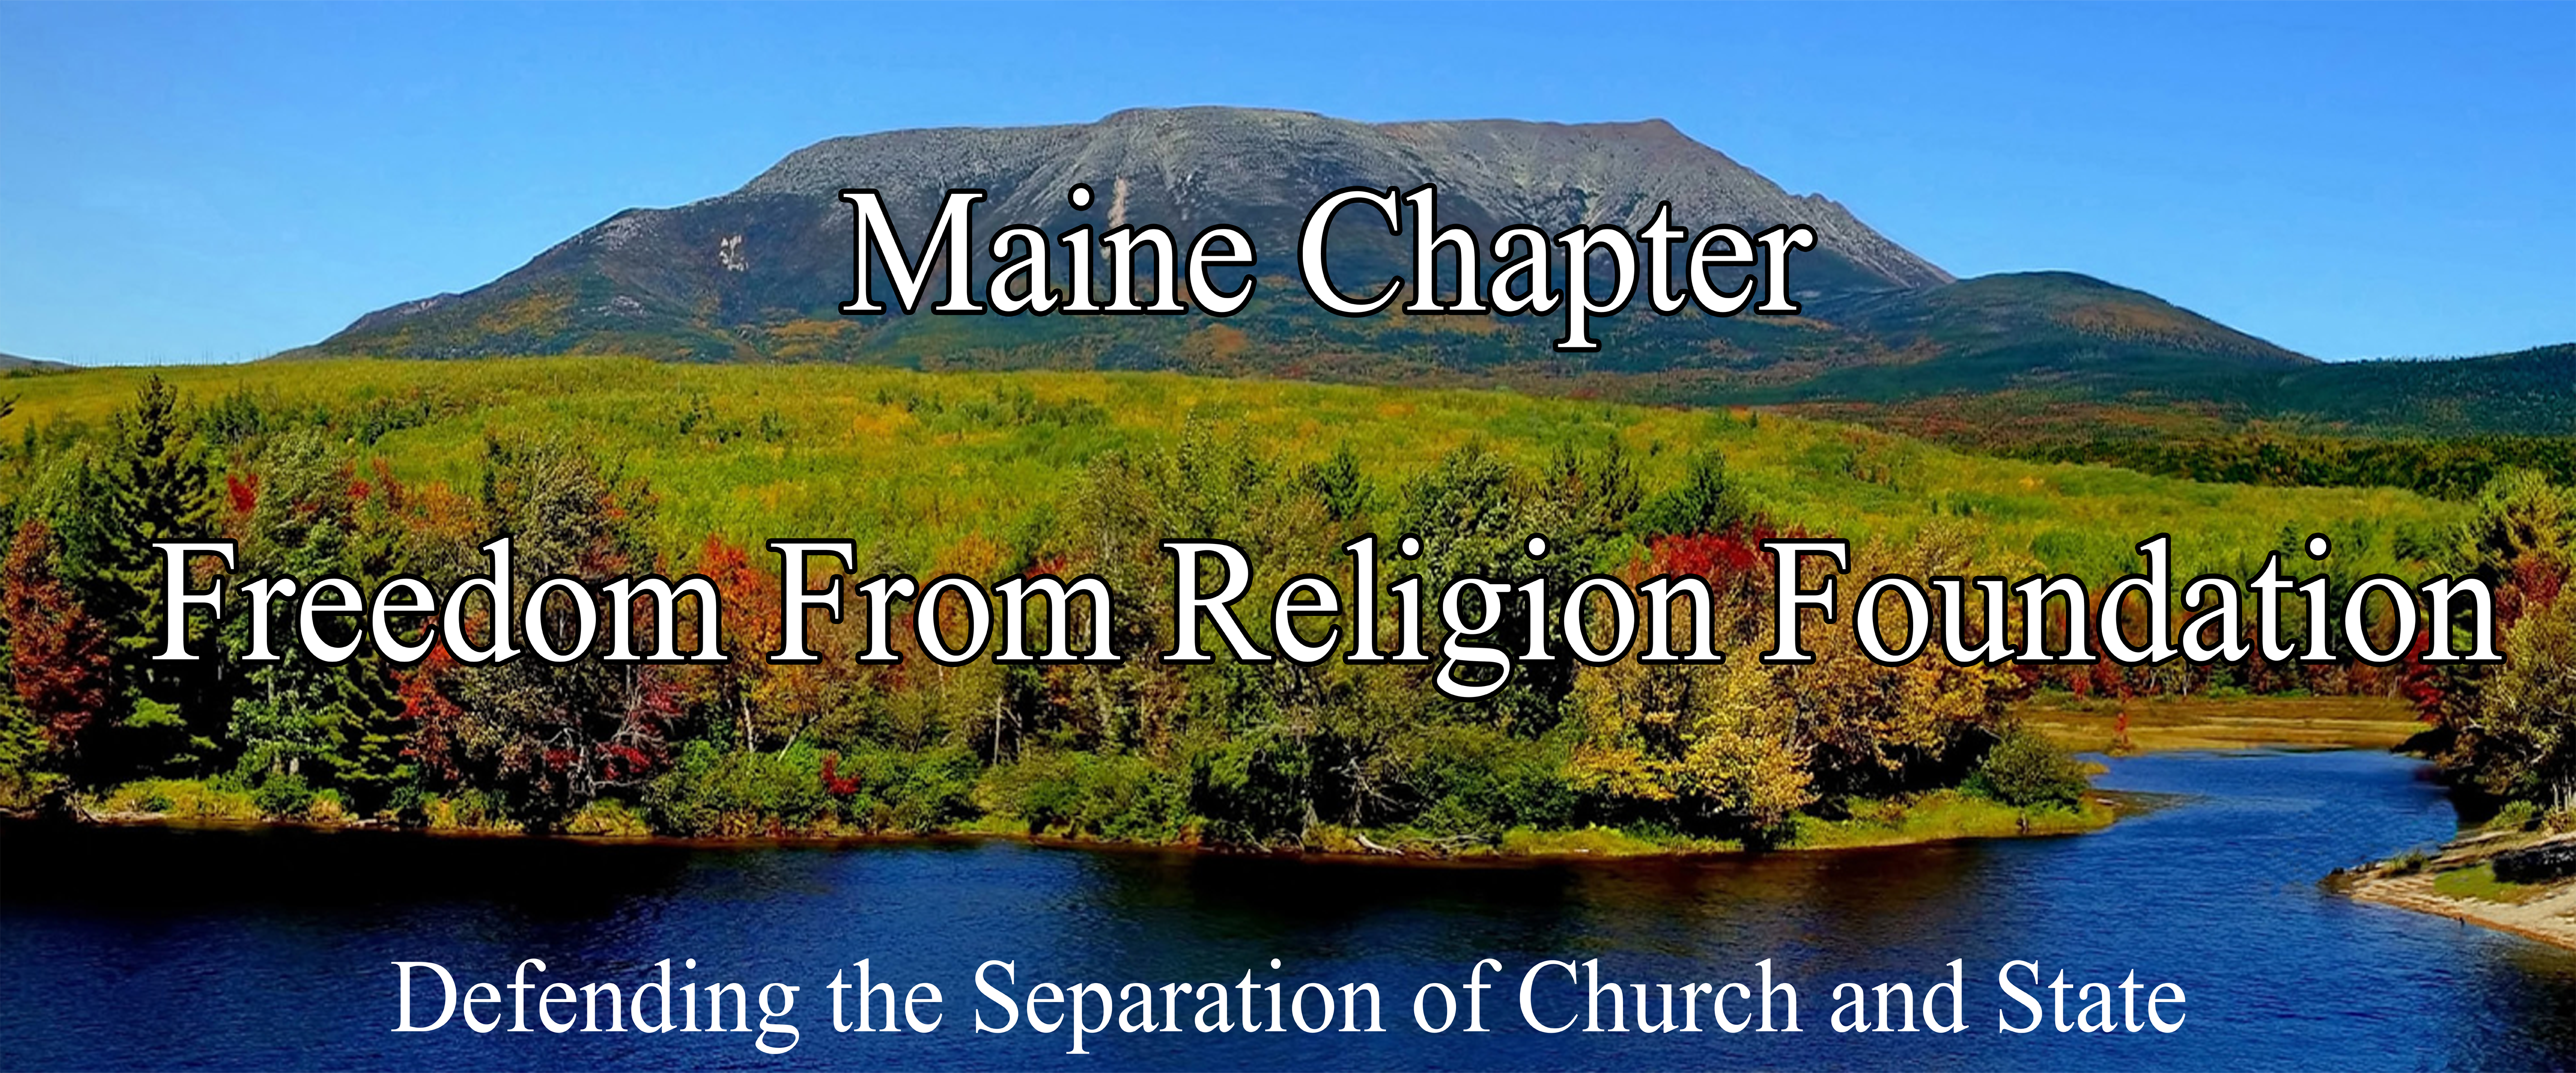 Maine Chapter Freedom From Religion Foundation banner sm